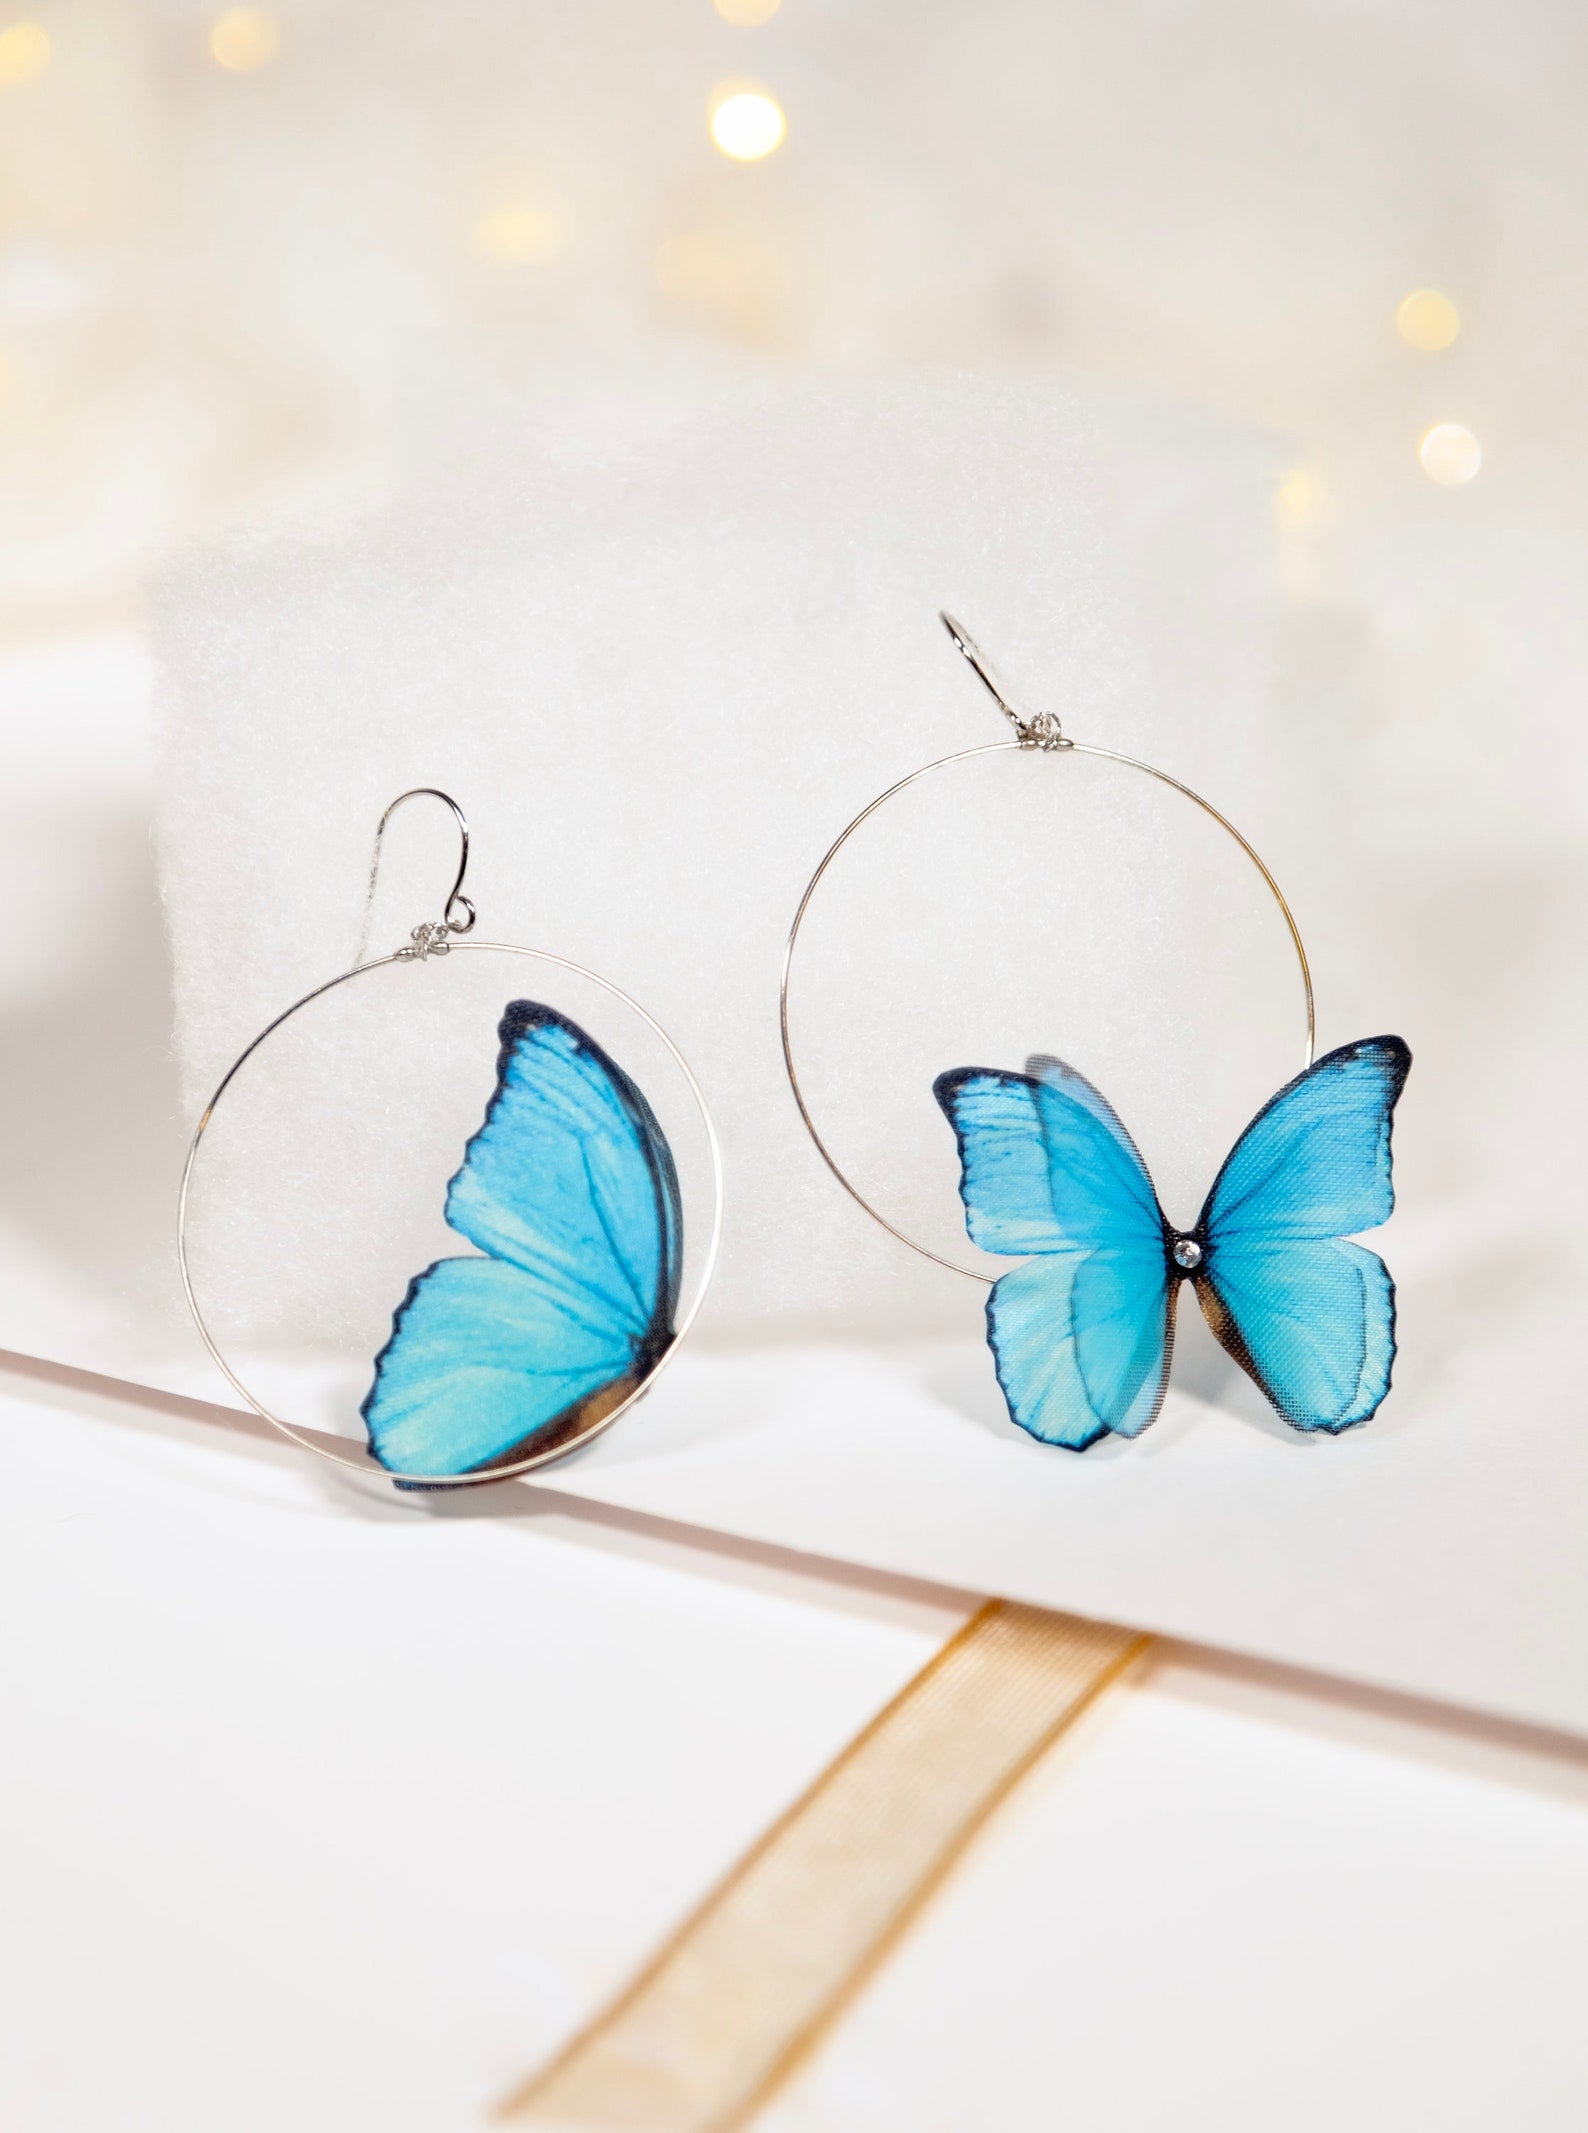 Blue Butterfly Hoop Earrings with Delicate Beading on White Background